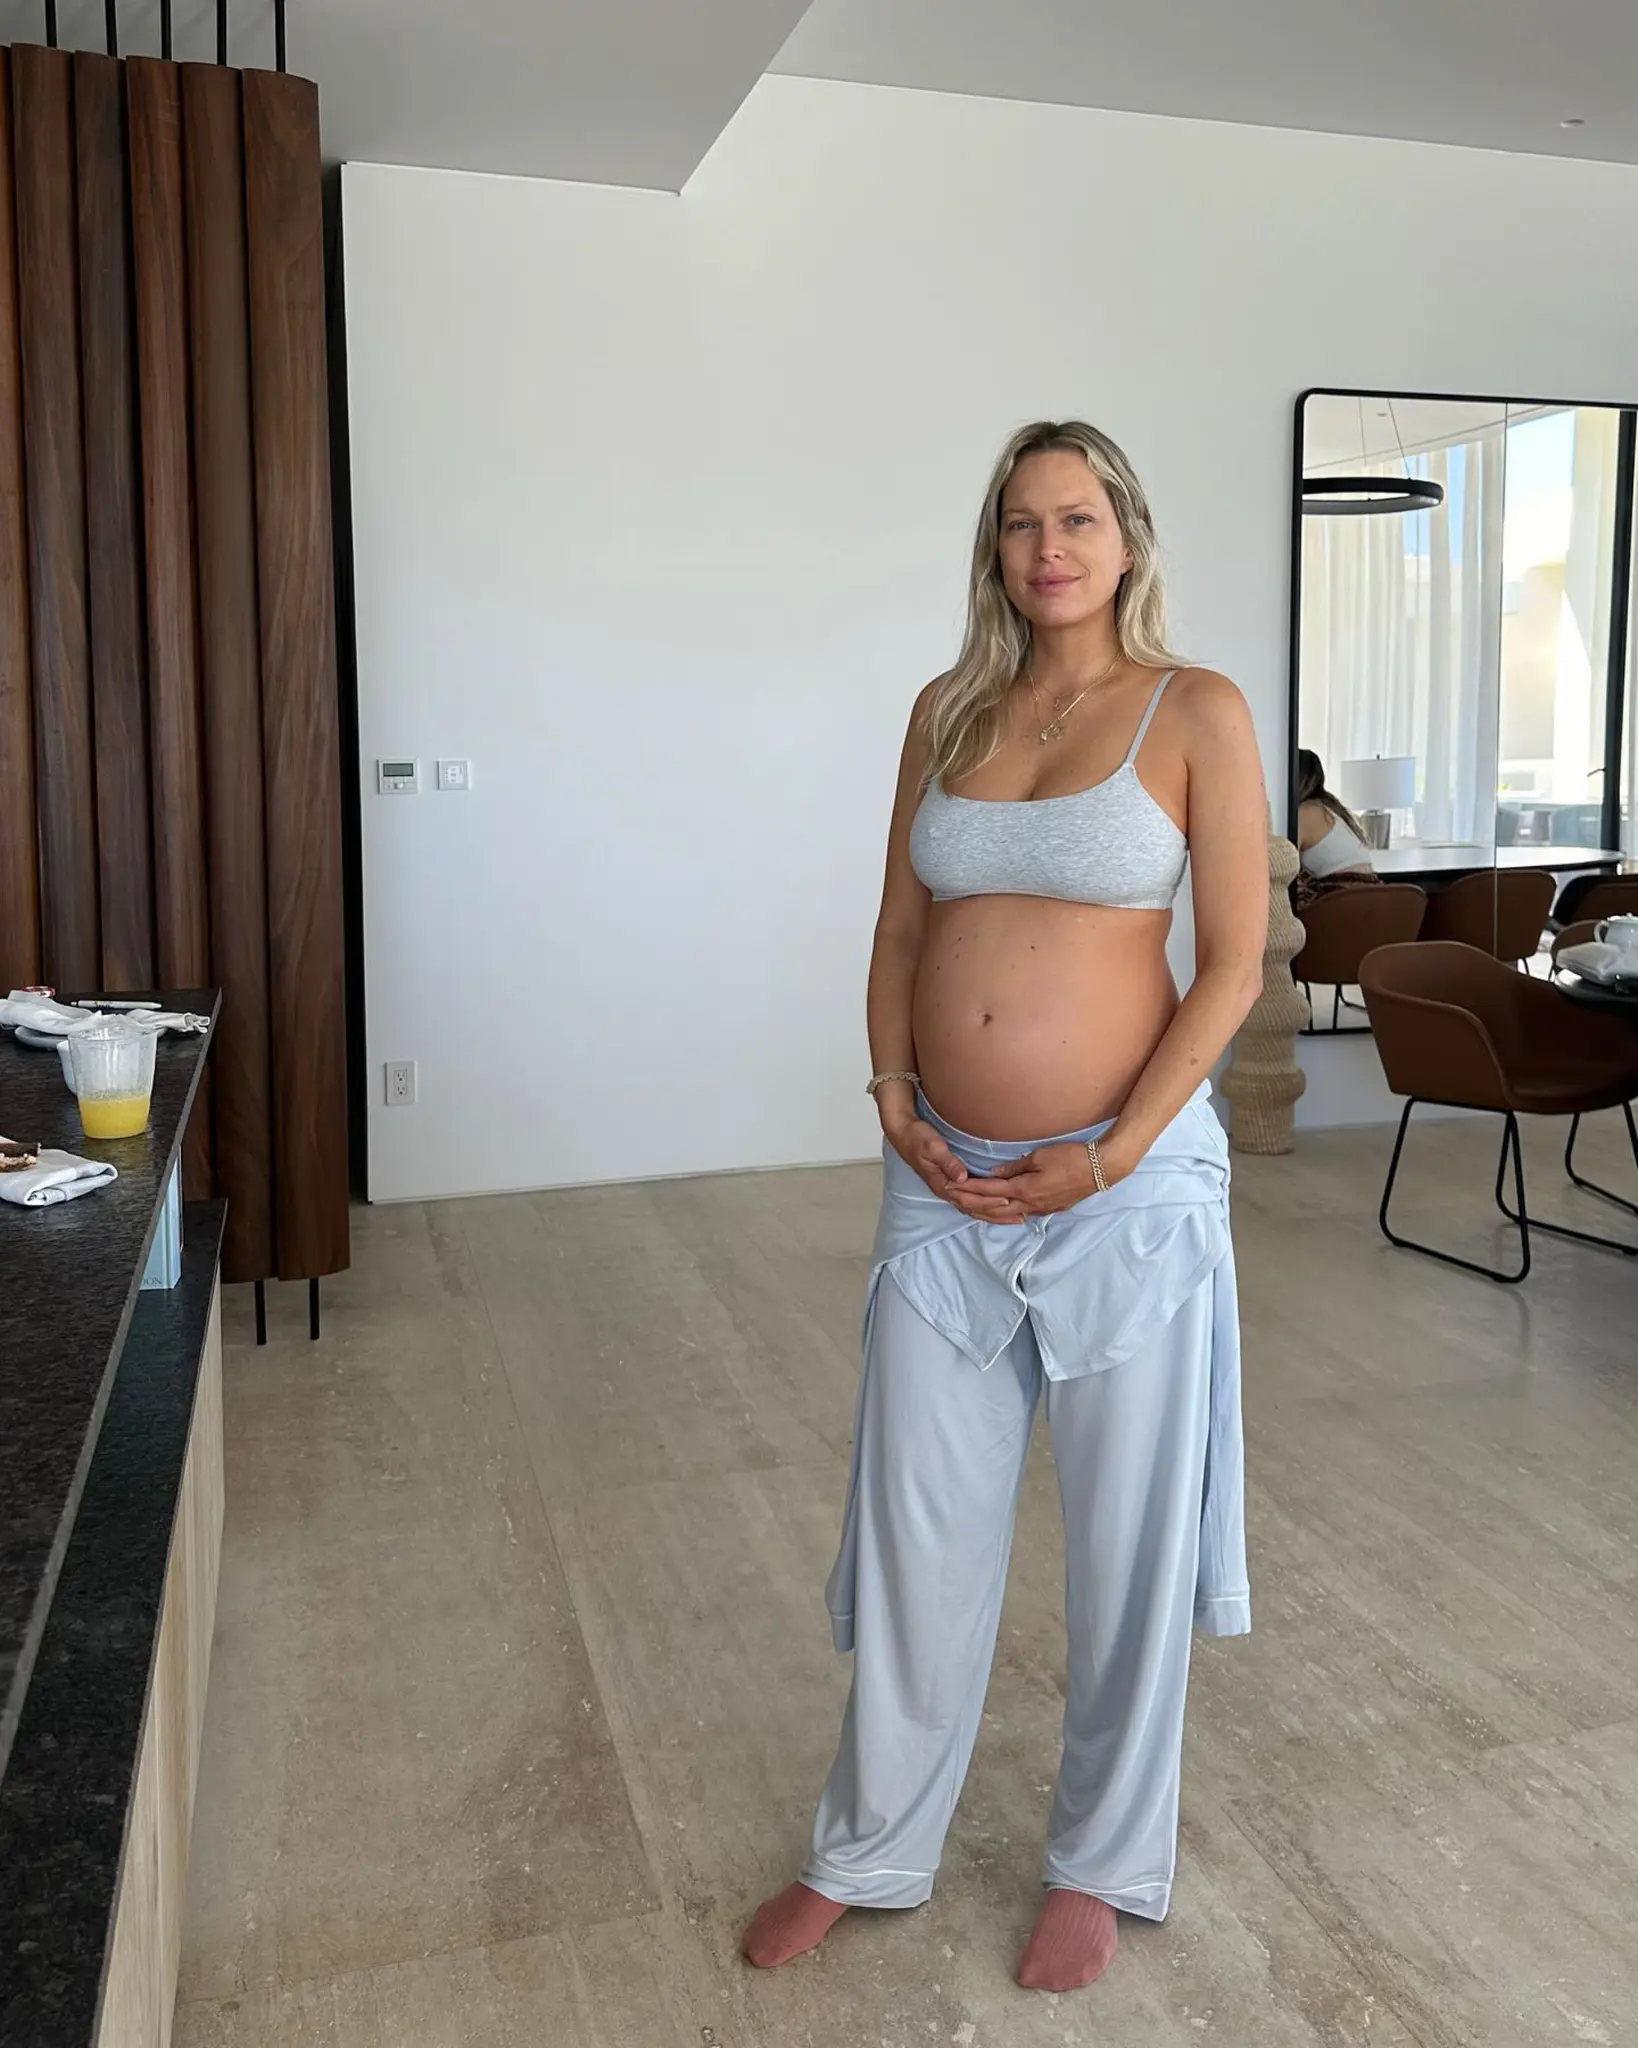 Is Erin Foster's Home Birth the New Celebrity Trend? Unpacking the Intense Experience